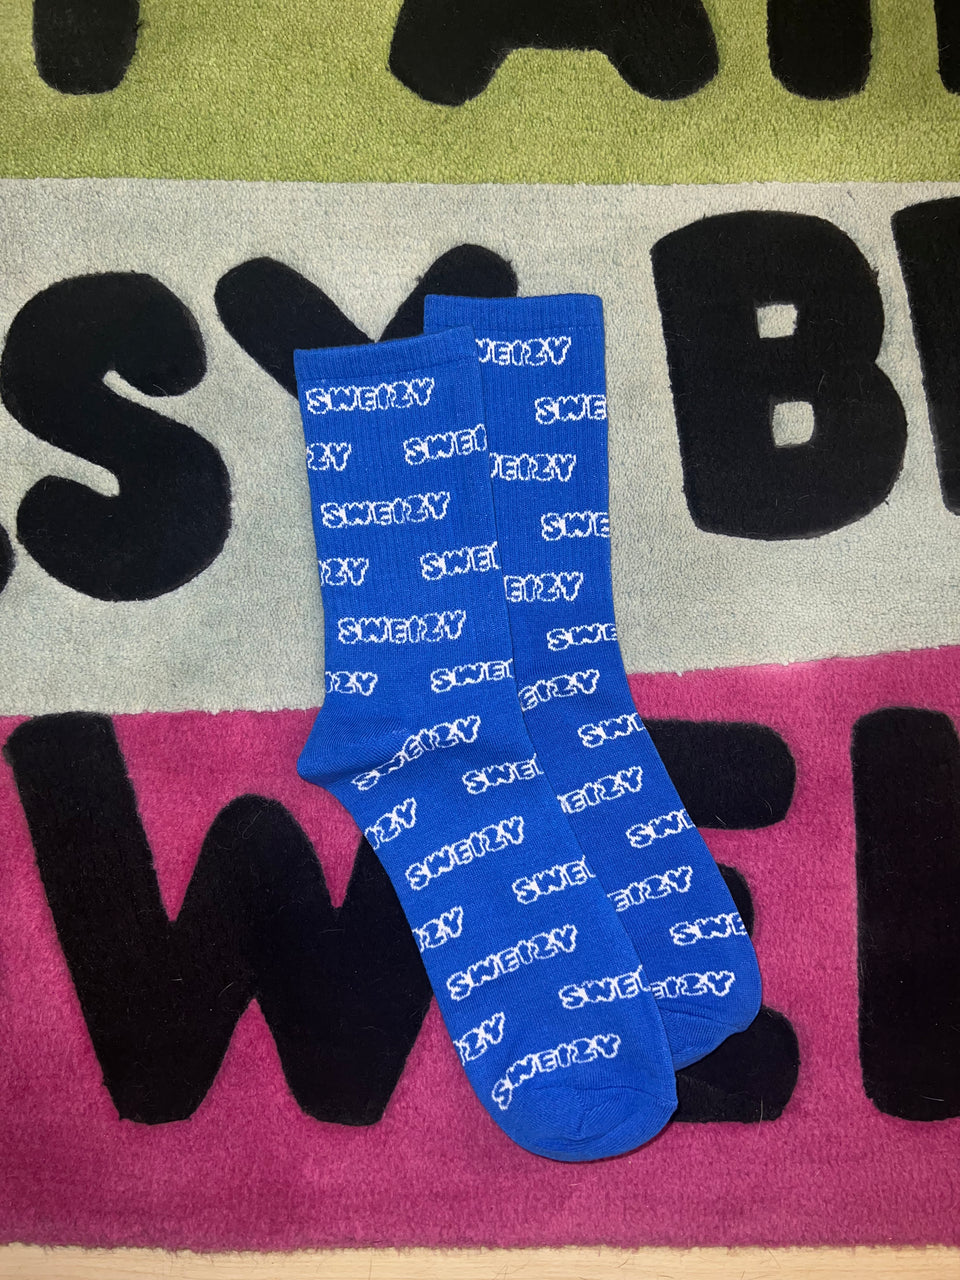 The Sweizy All-Over Socks